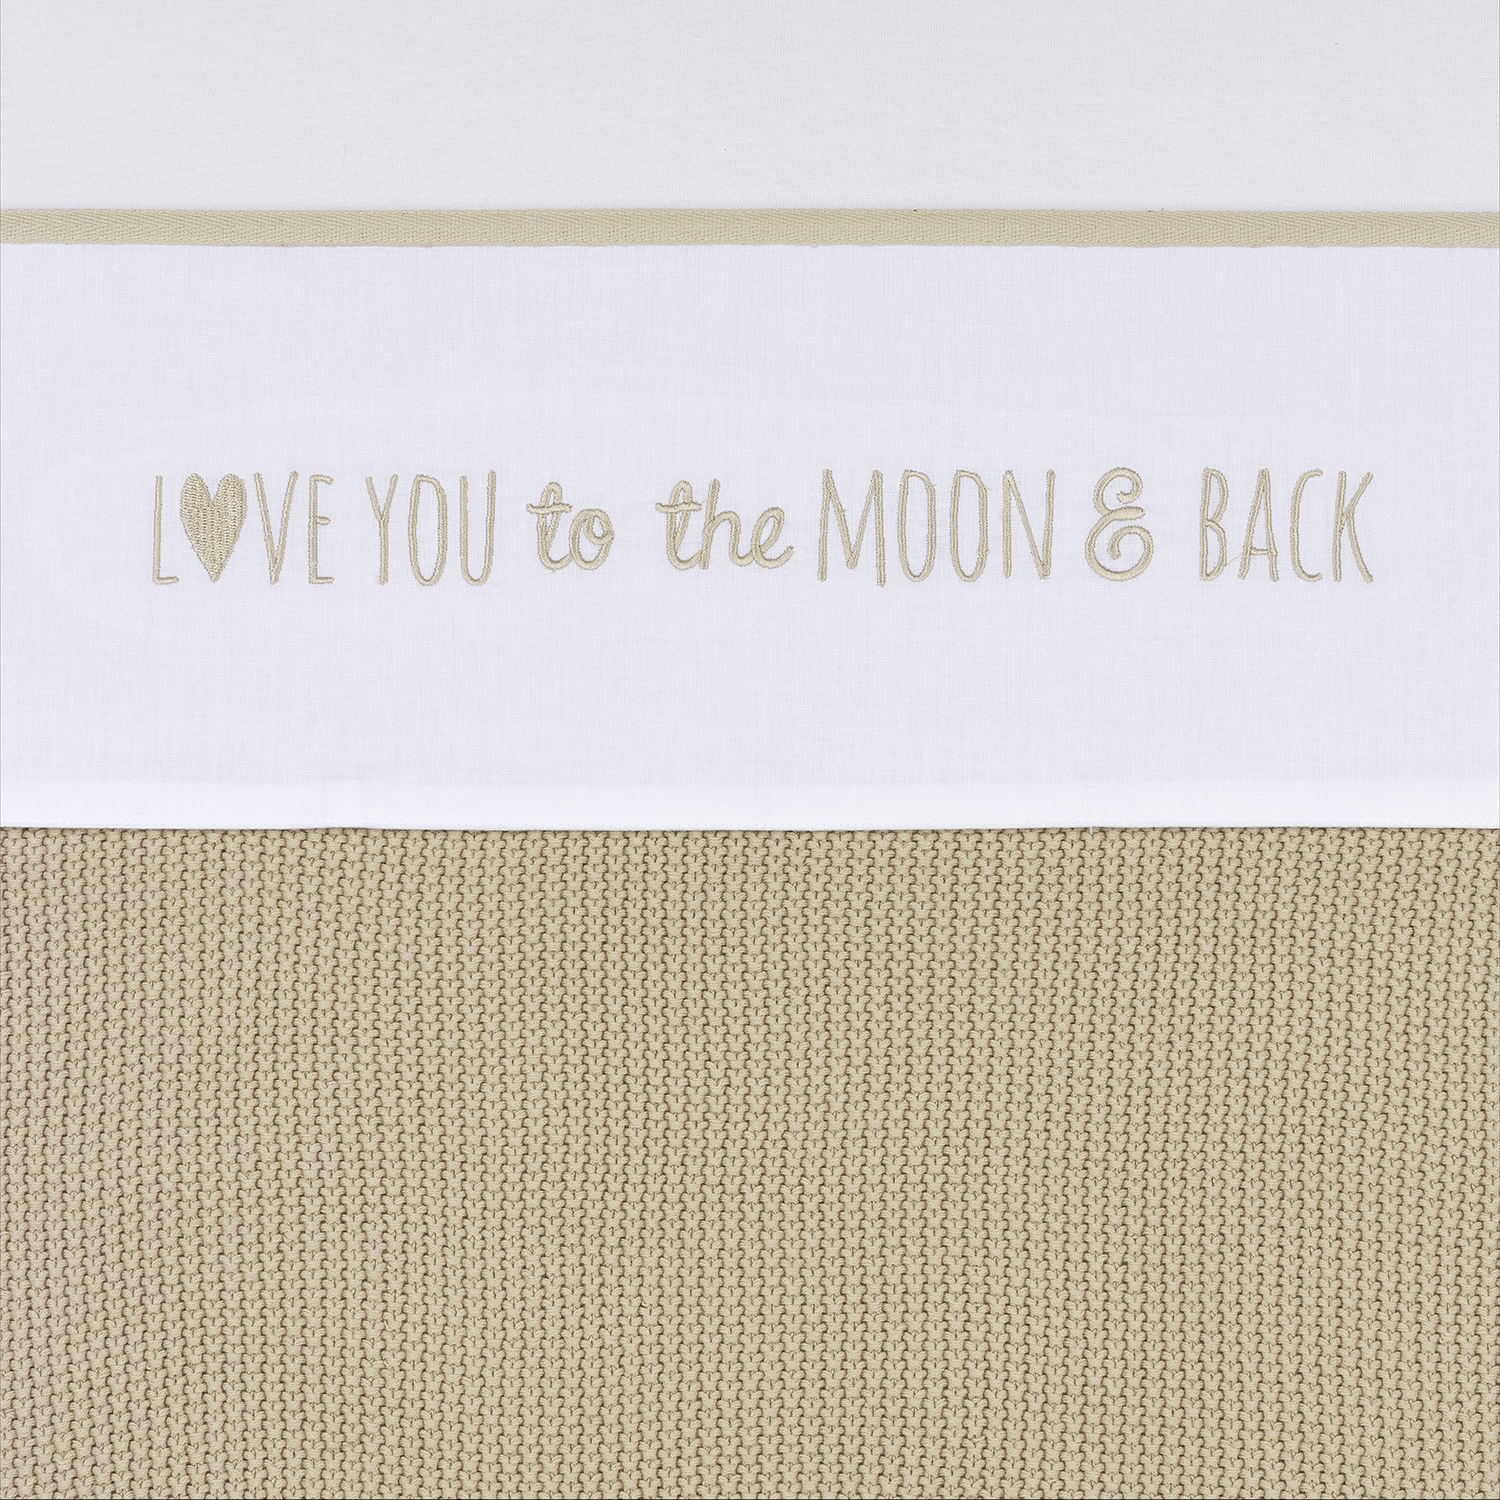 Wieglaken Love you to the moon & back - sand - 75x100cm